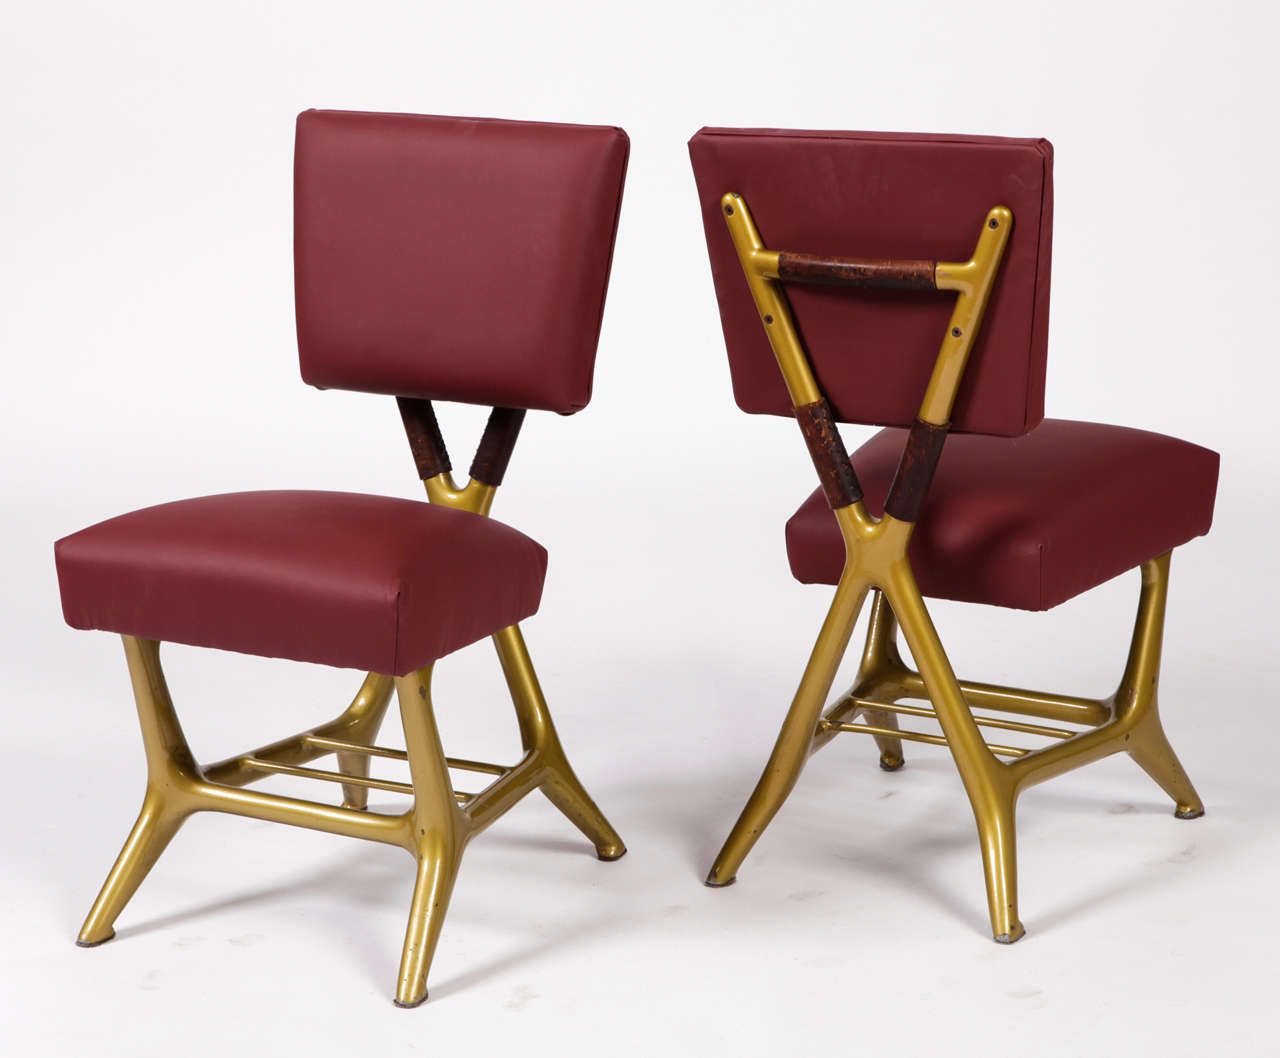 pair of chairs by GIULIO MINOLETTI for the original forniture of the ETR 300 train, produced by Officine Breda 1949
Measures: h 82cm 48 x 40 cm 
Literature:A. Branzi,M, De Lucchi 